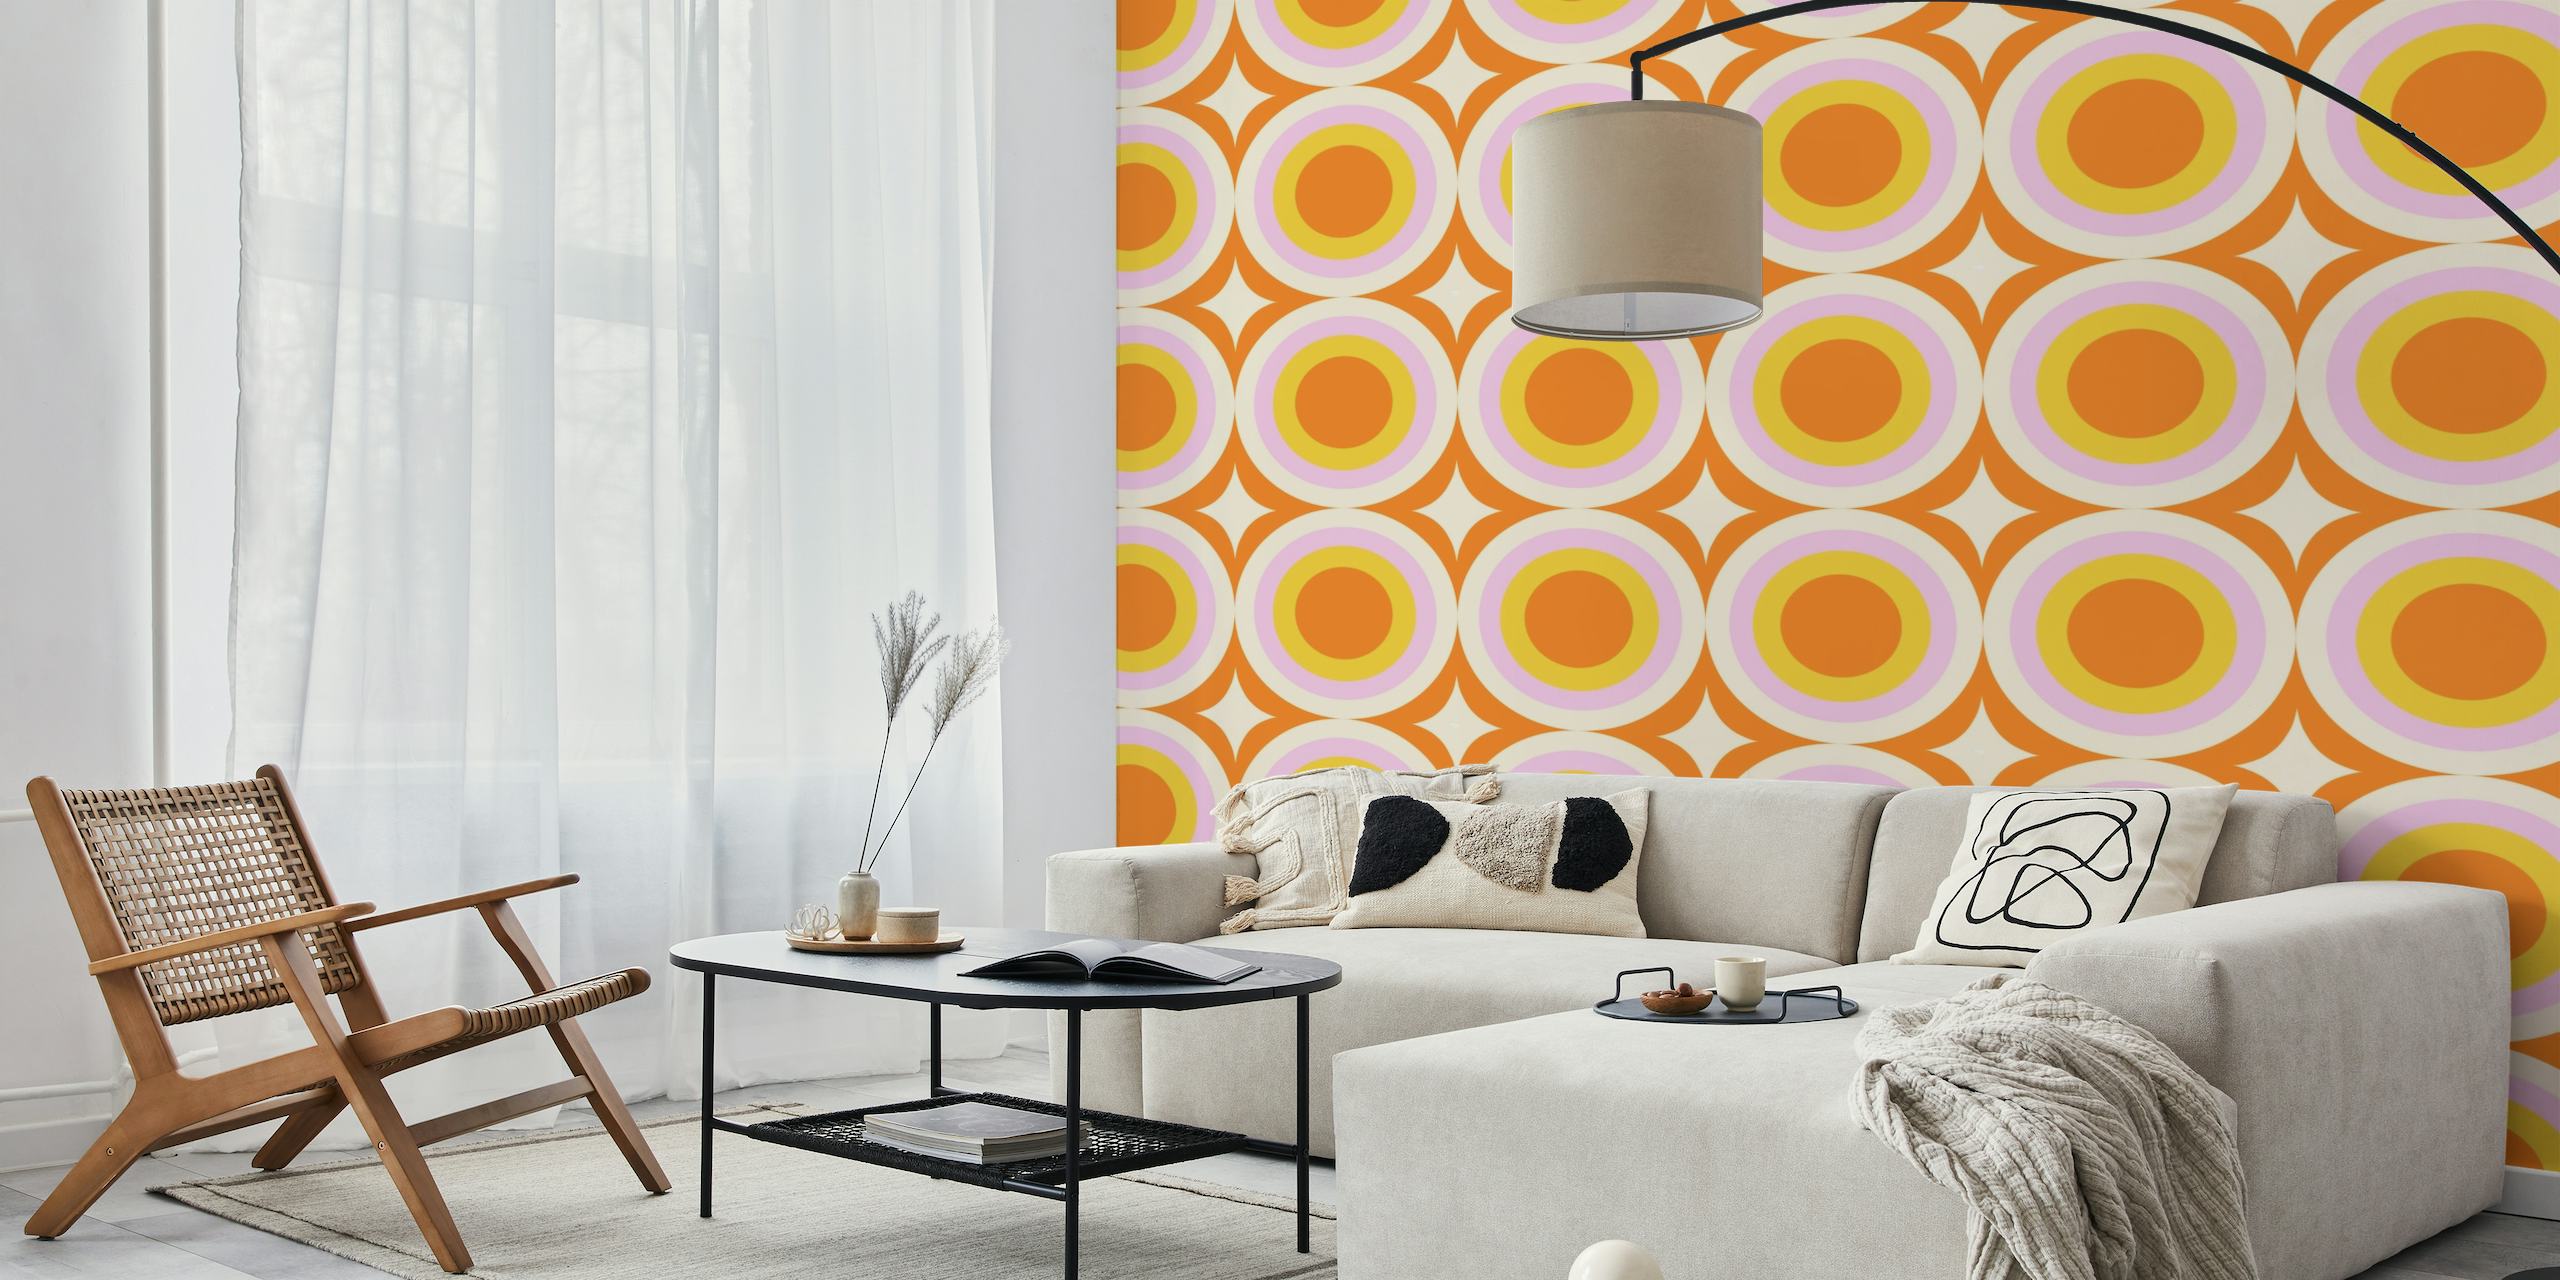 Orange and white groovy dots pattern wall mural